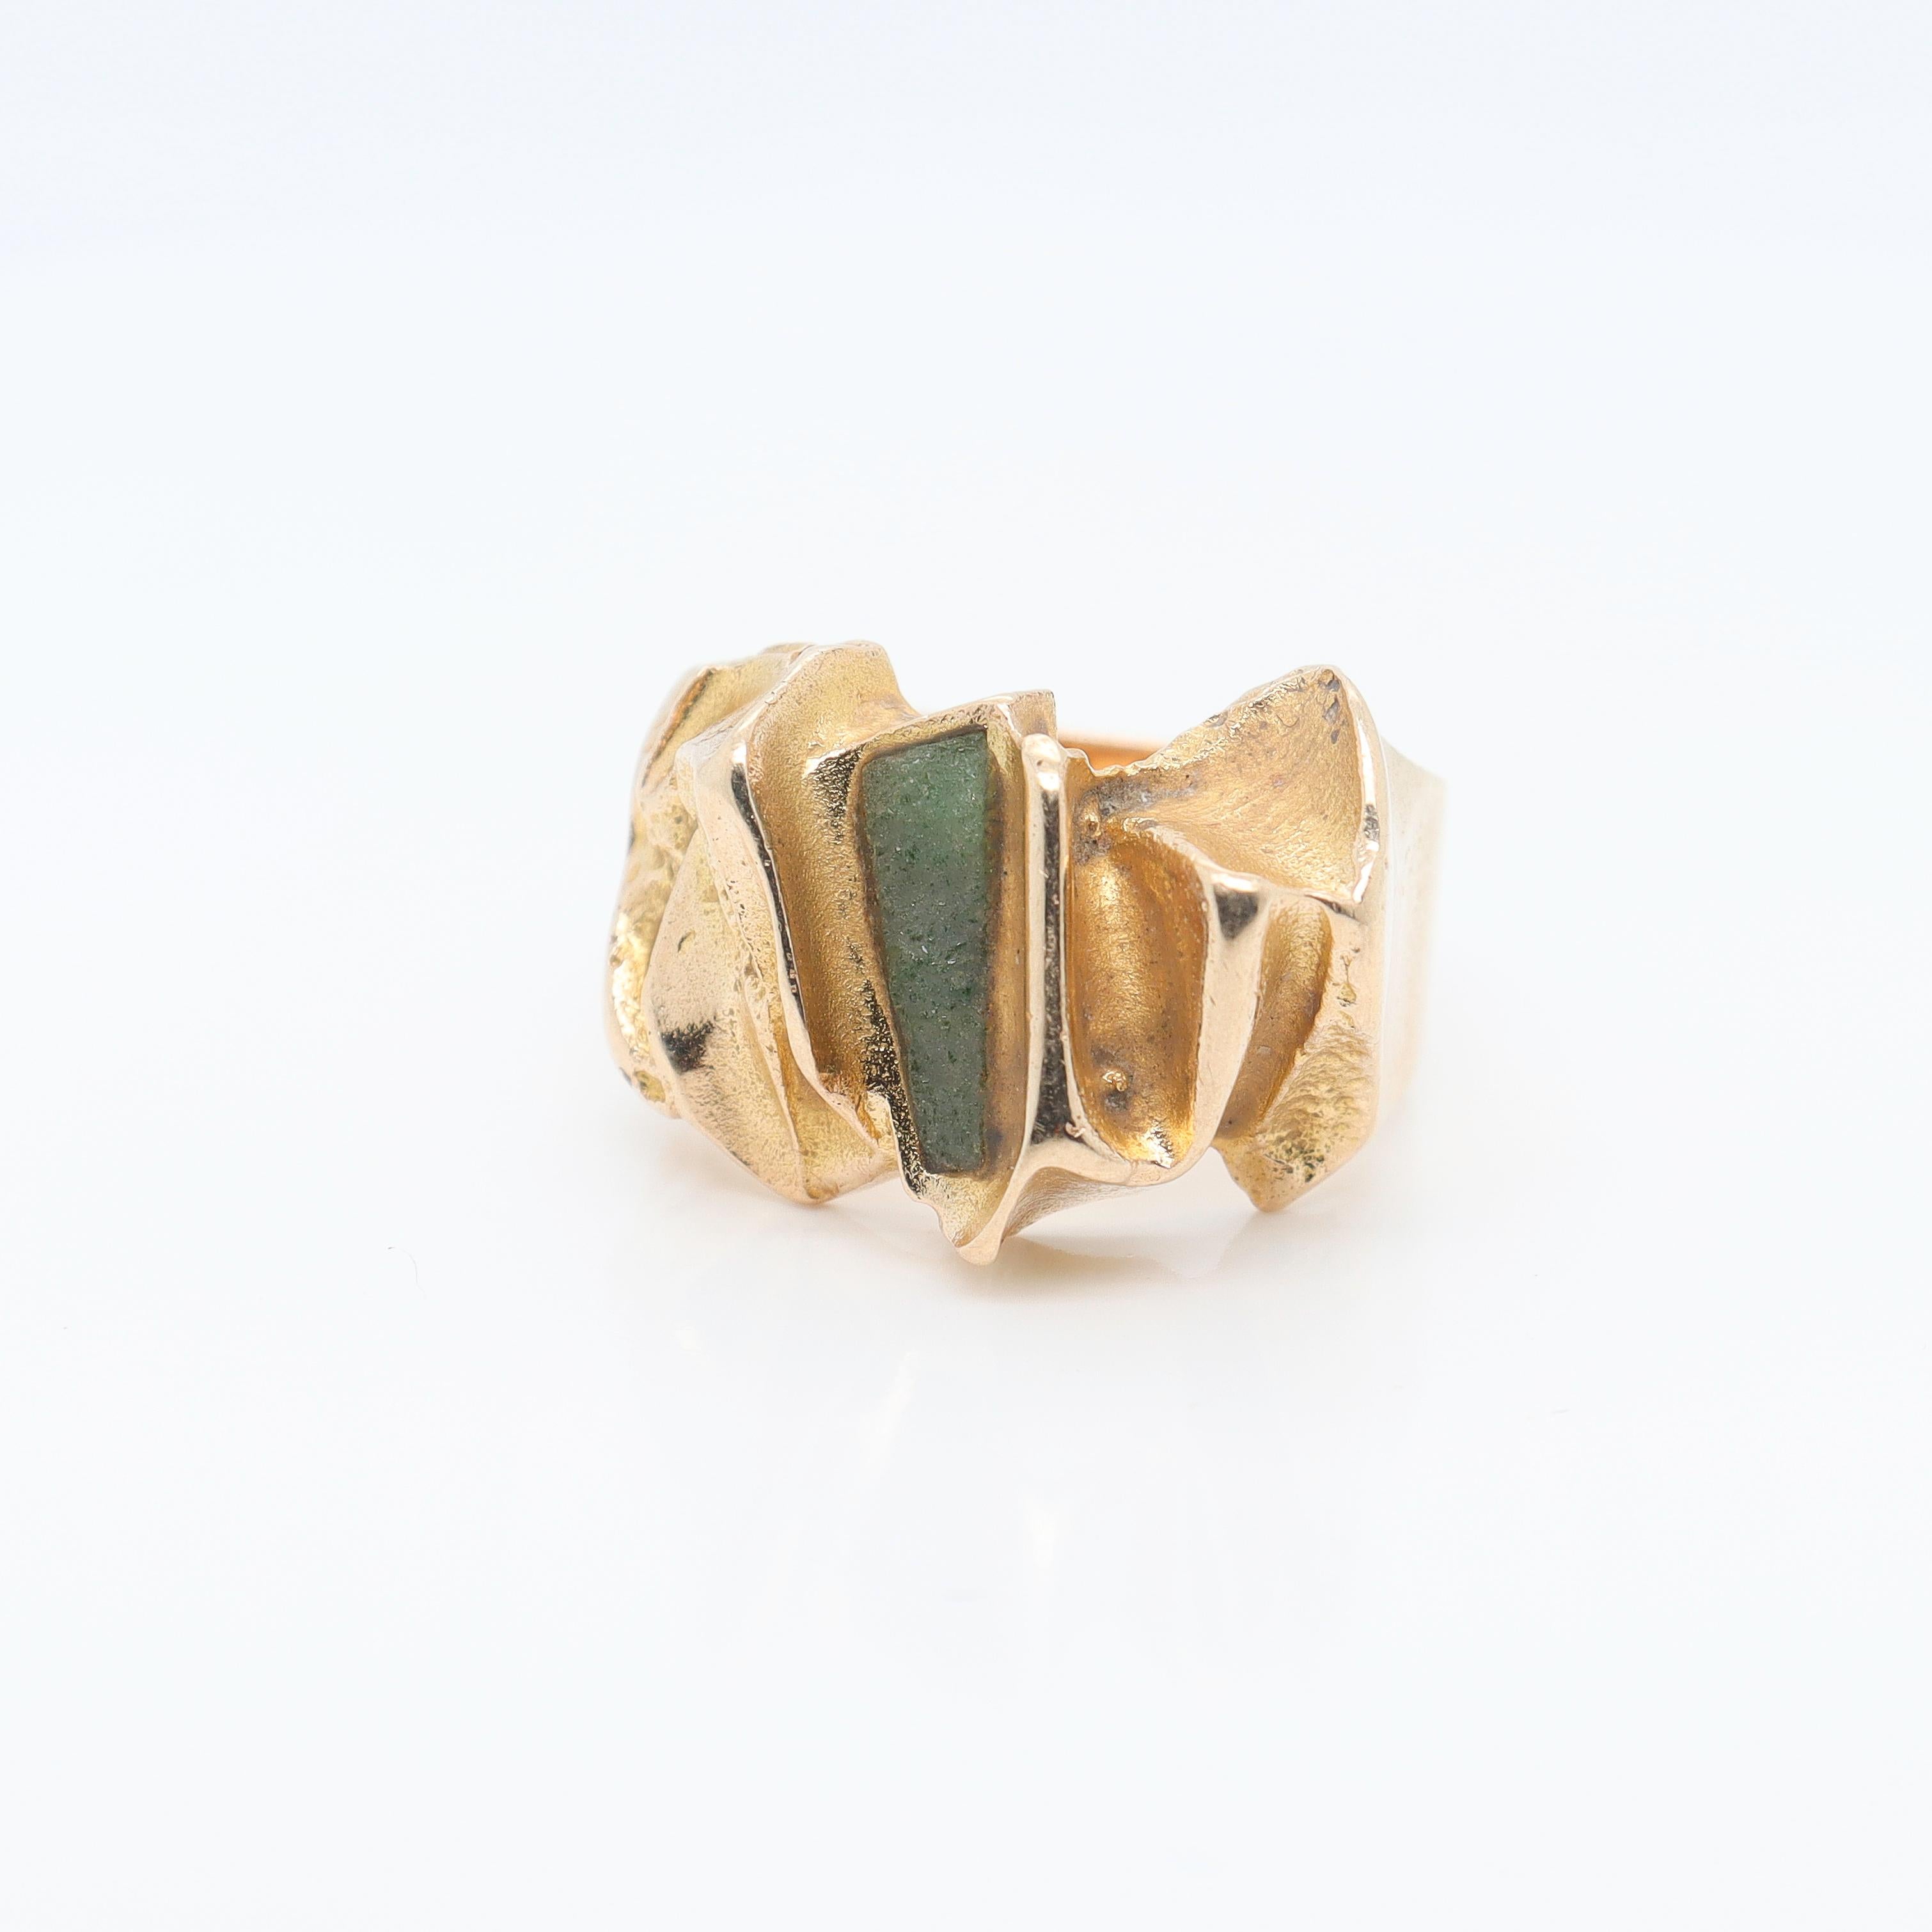 Björn Weckström Scandanavian Mid-Century Modernist 14k Gold and Zoisite Ring In Good Condition For Sale In Philadelphia, PA